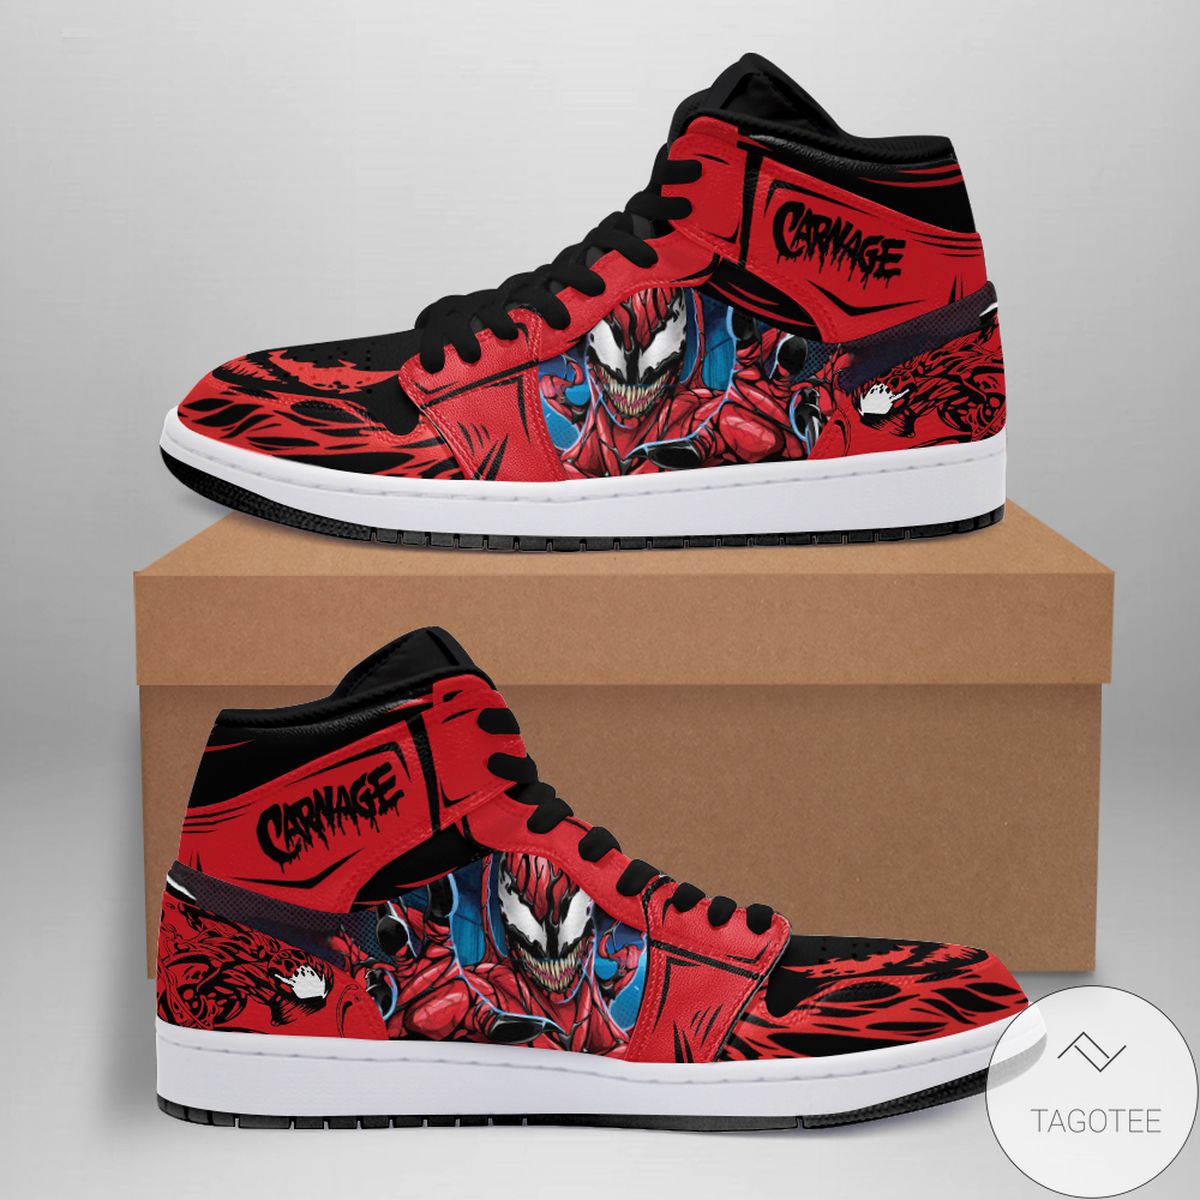 Personalized Carnage Air Jordan High Top Shoes